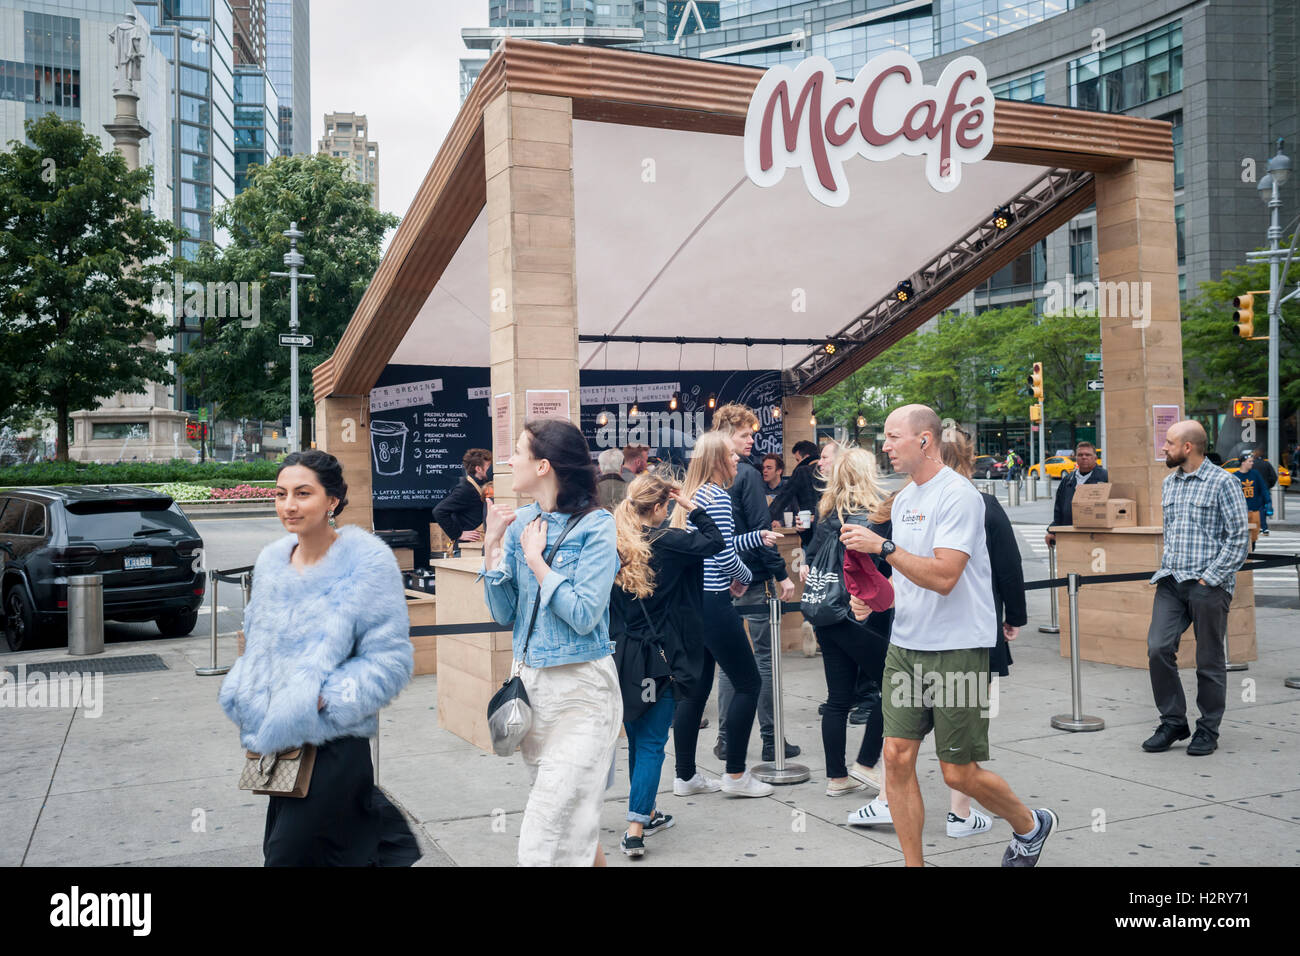 McDonald's McCafe promotion on National Coffee Day in New York on Thursday, September 29, 2016. The pop-up is related to McDonald's promoting their use of sustainable coffee beans. (© Richard B. Levine) Stock Photo